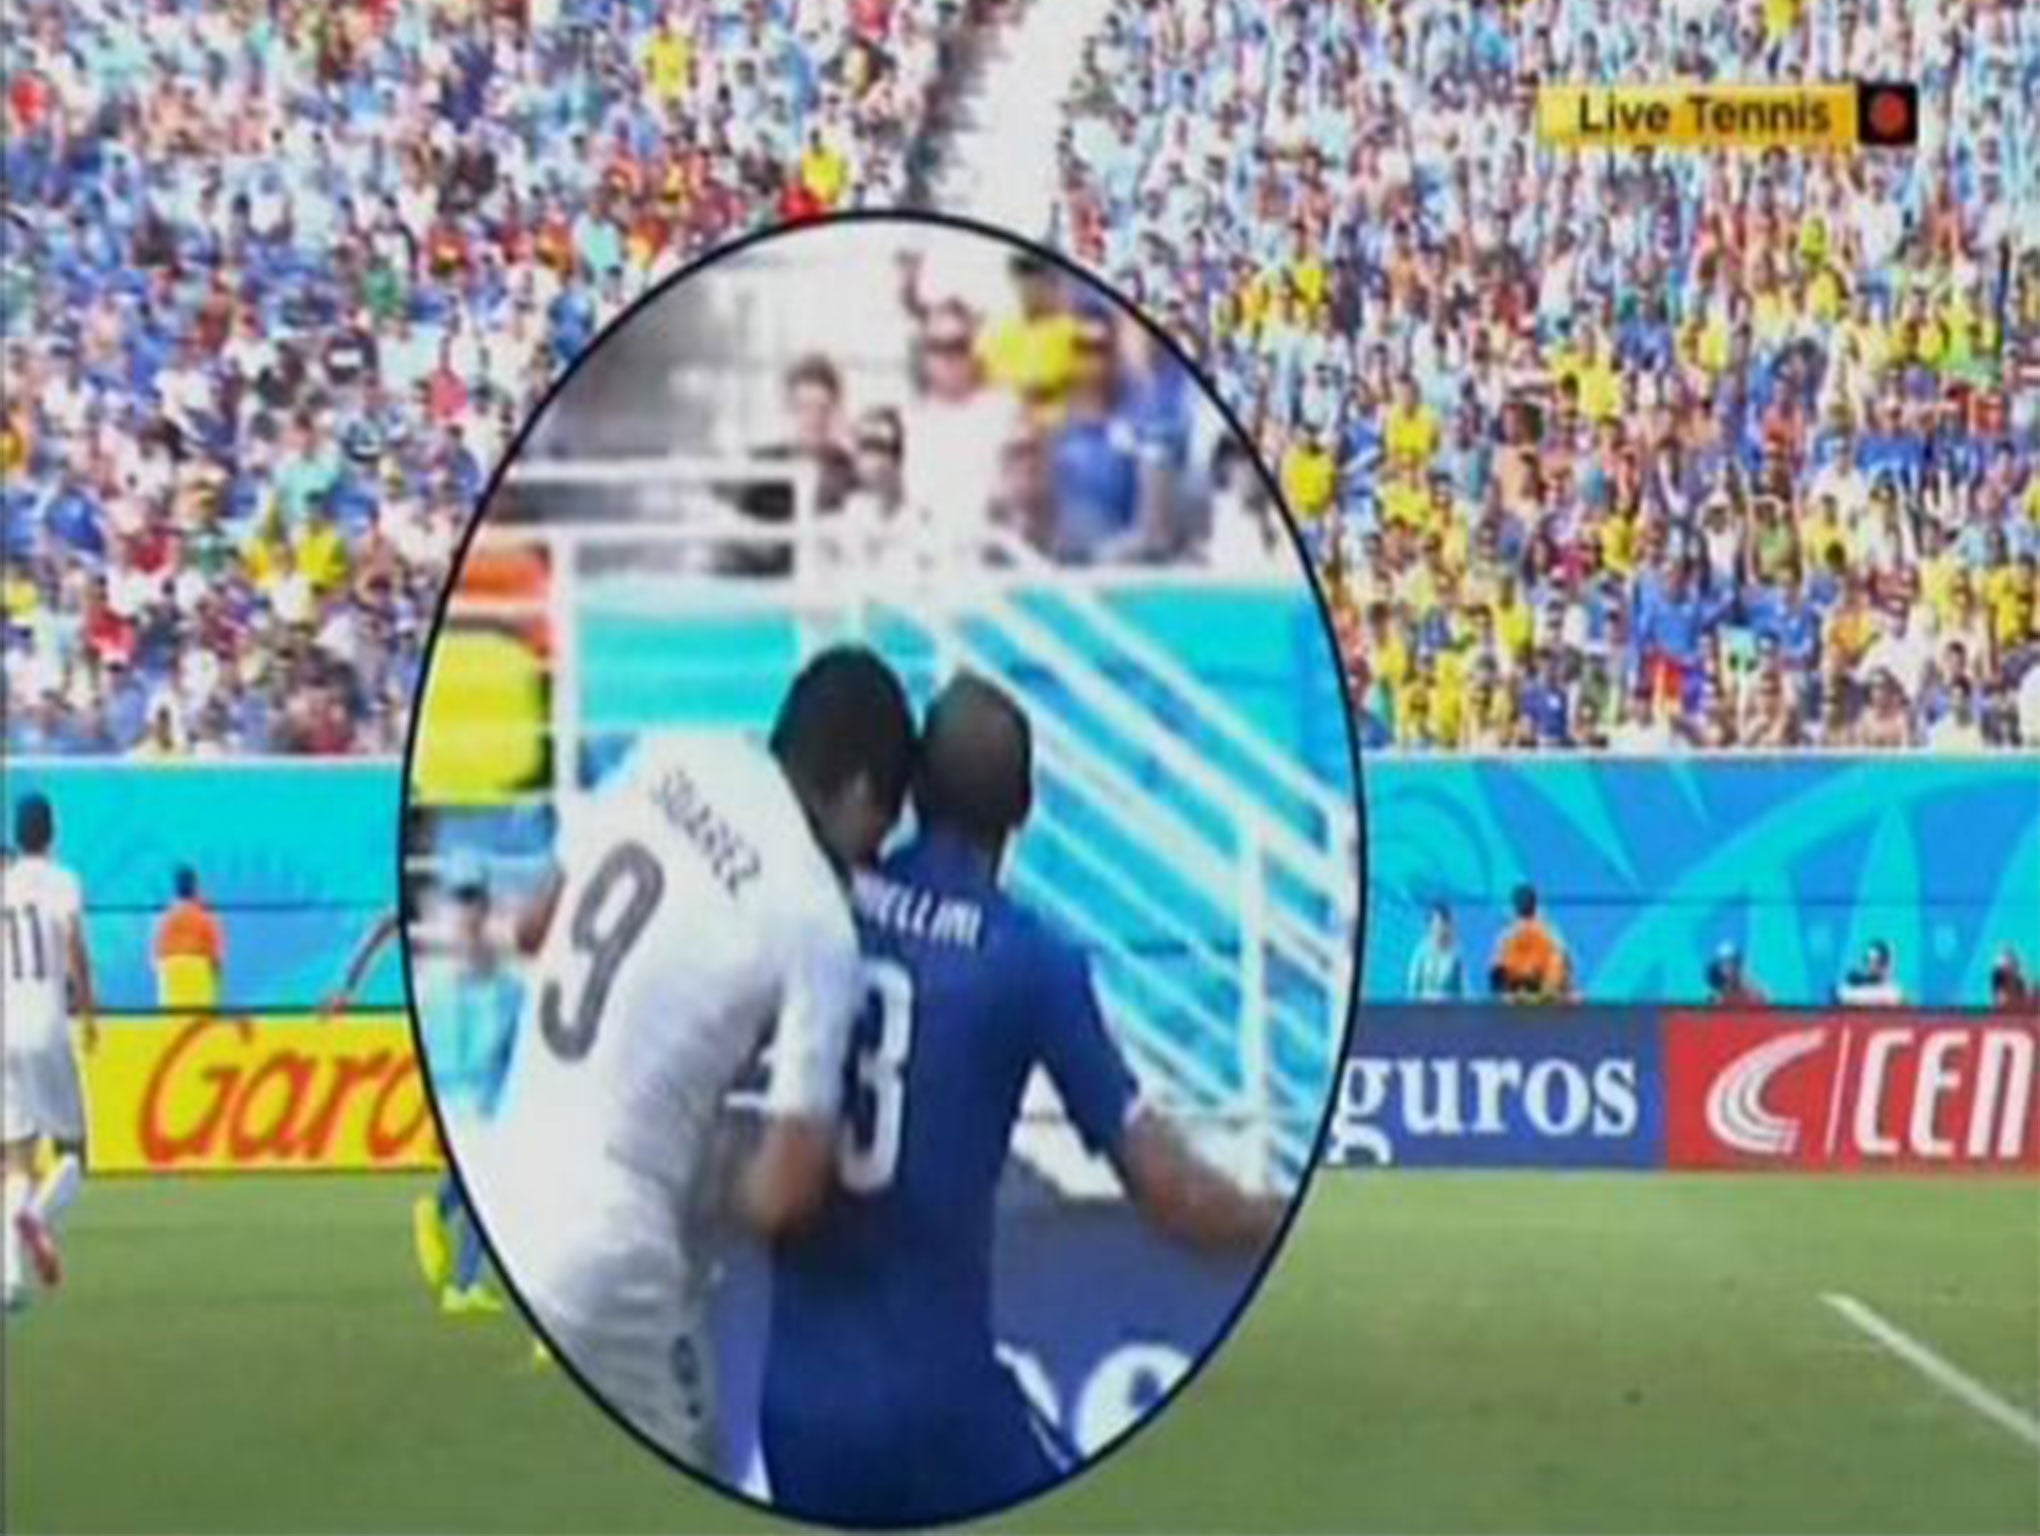 Suarez bit Chiellini during Uruguay's 1-0 win over Italy at the World Cup